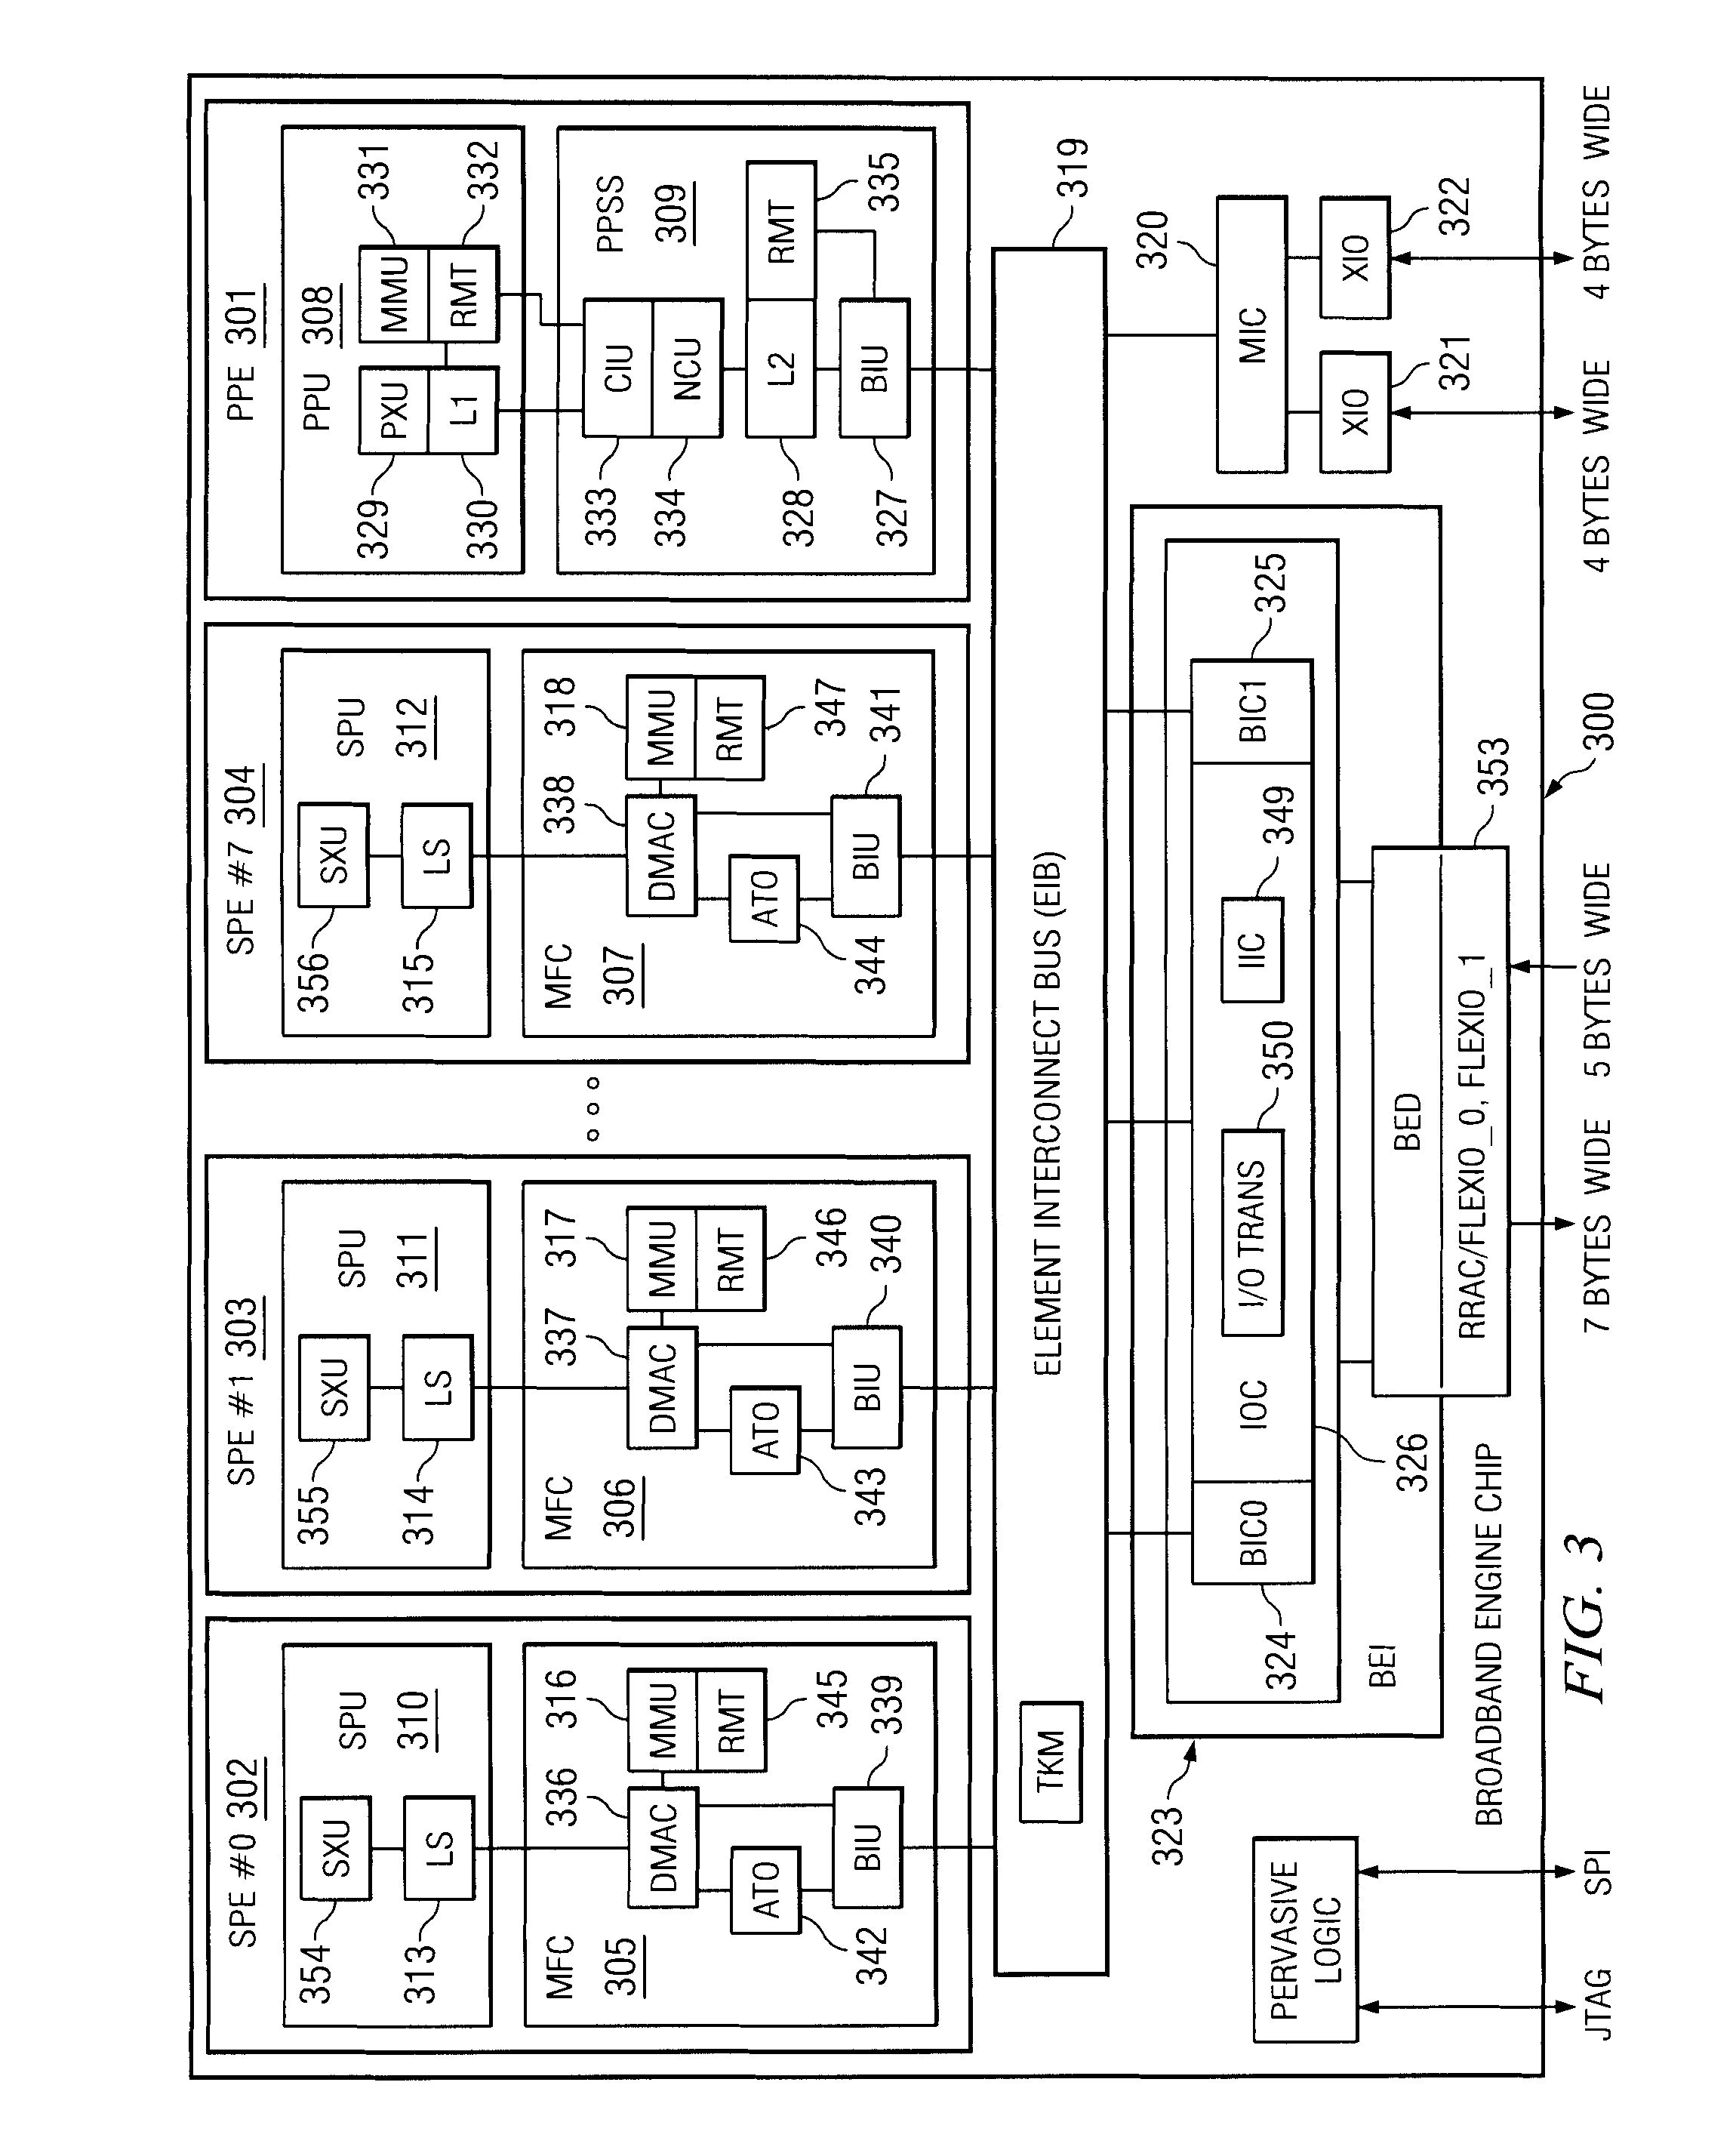 Method and apparatus for testing multi-core microprocessors